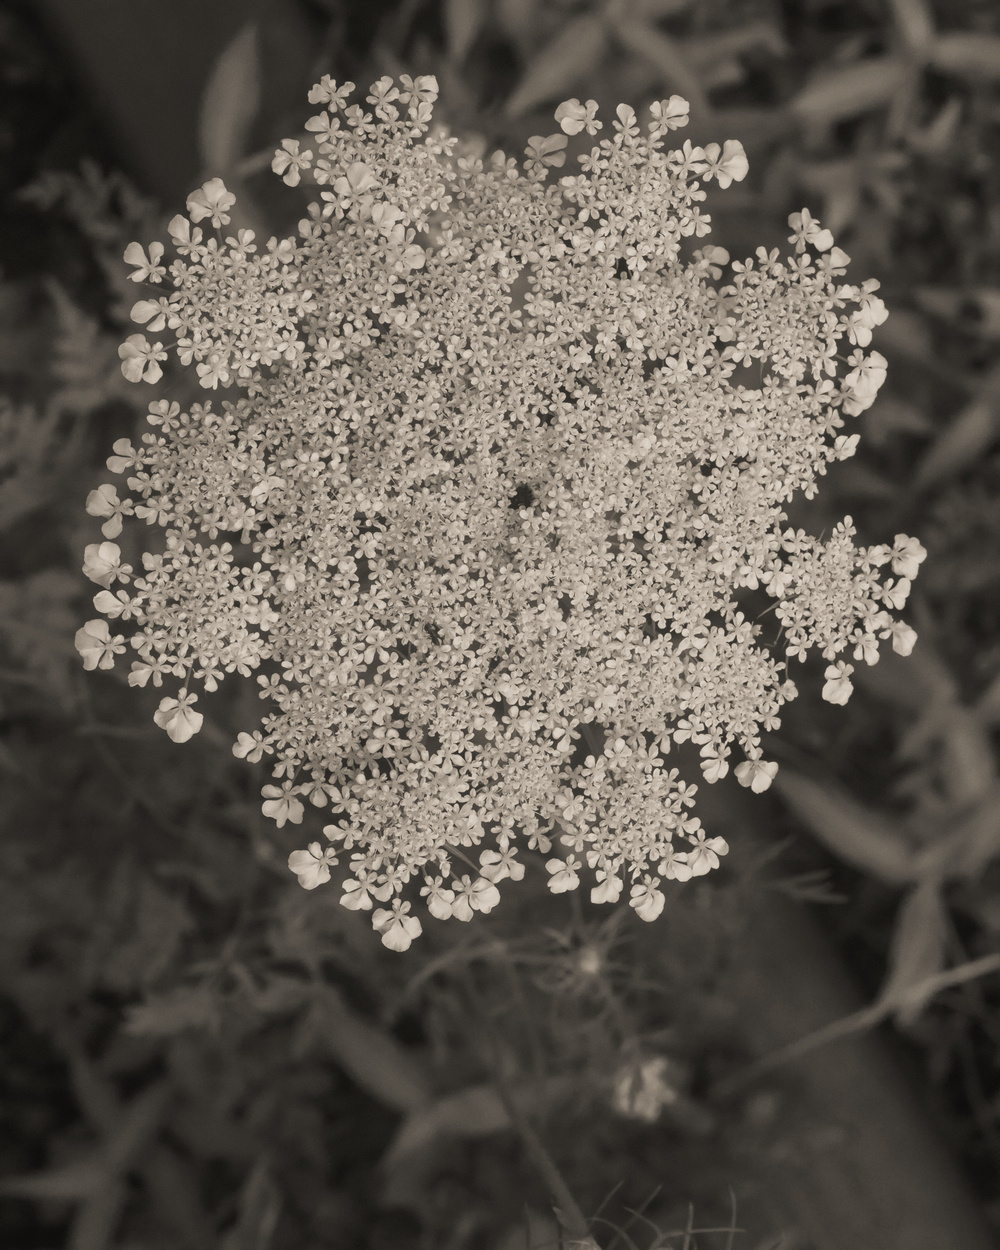 Queen Anne’s Lace bloom shot from directly above and located equidistant from left, top and right edges of the rectangular frame. Black and white image.